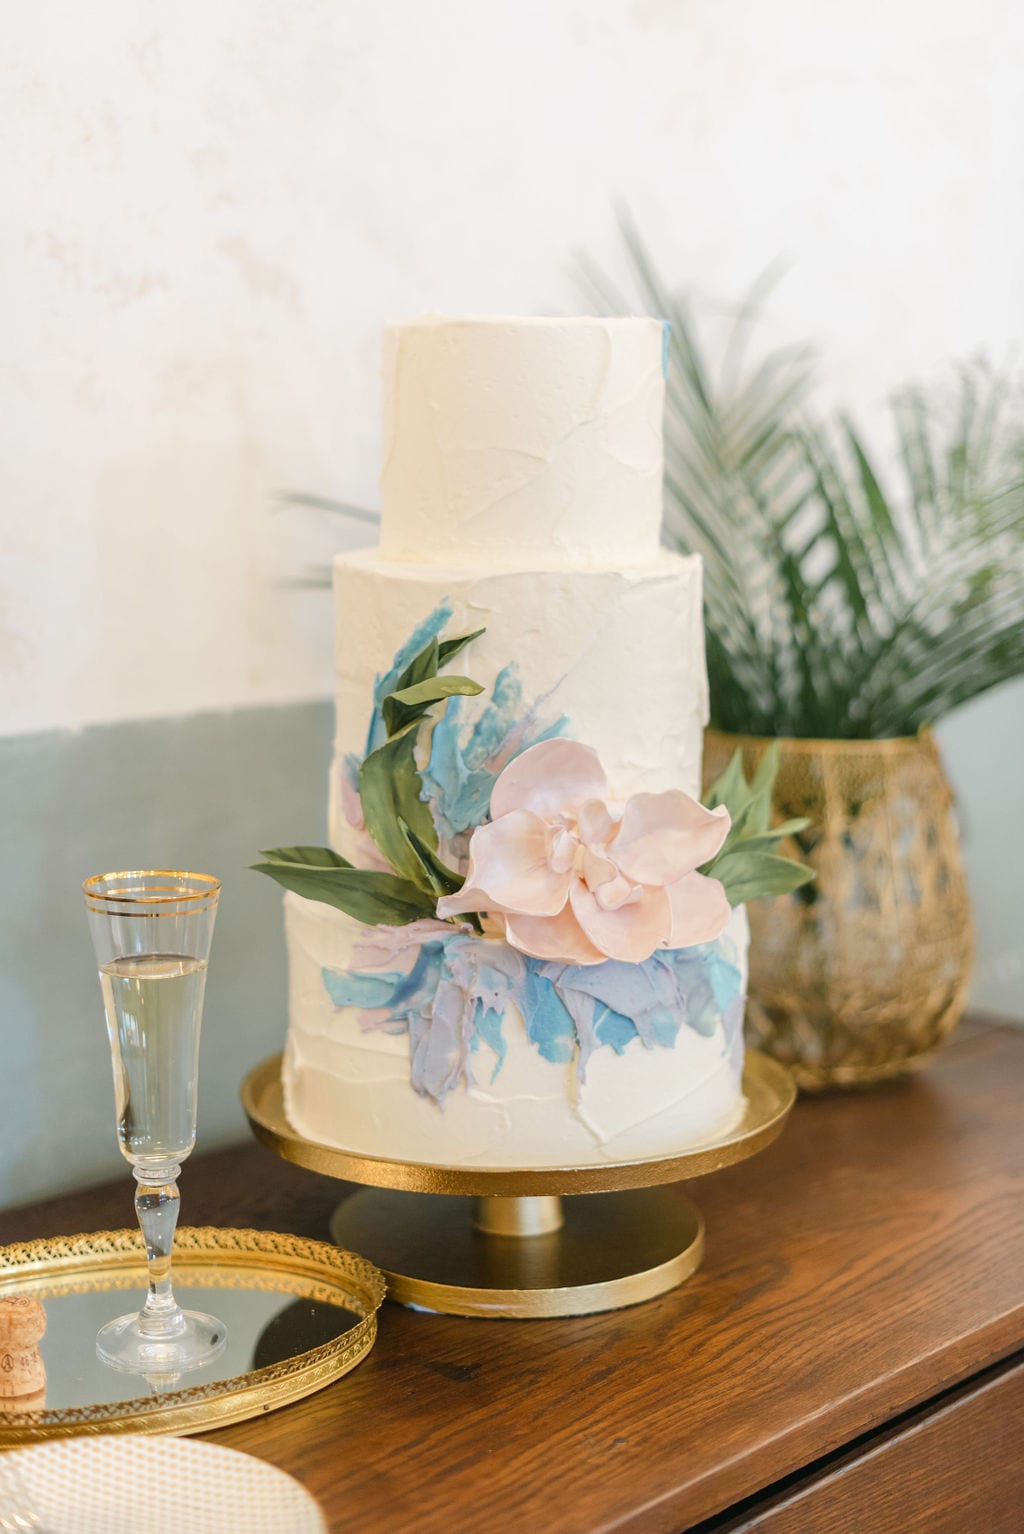 Three tiered wedding cake with pastel florals, sitting on a gold cake stand.